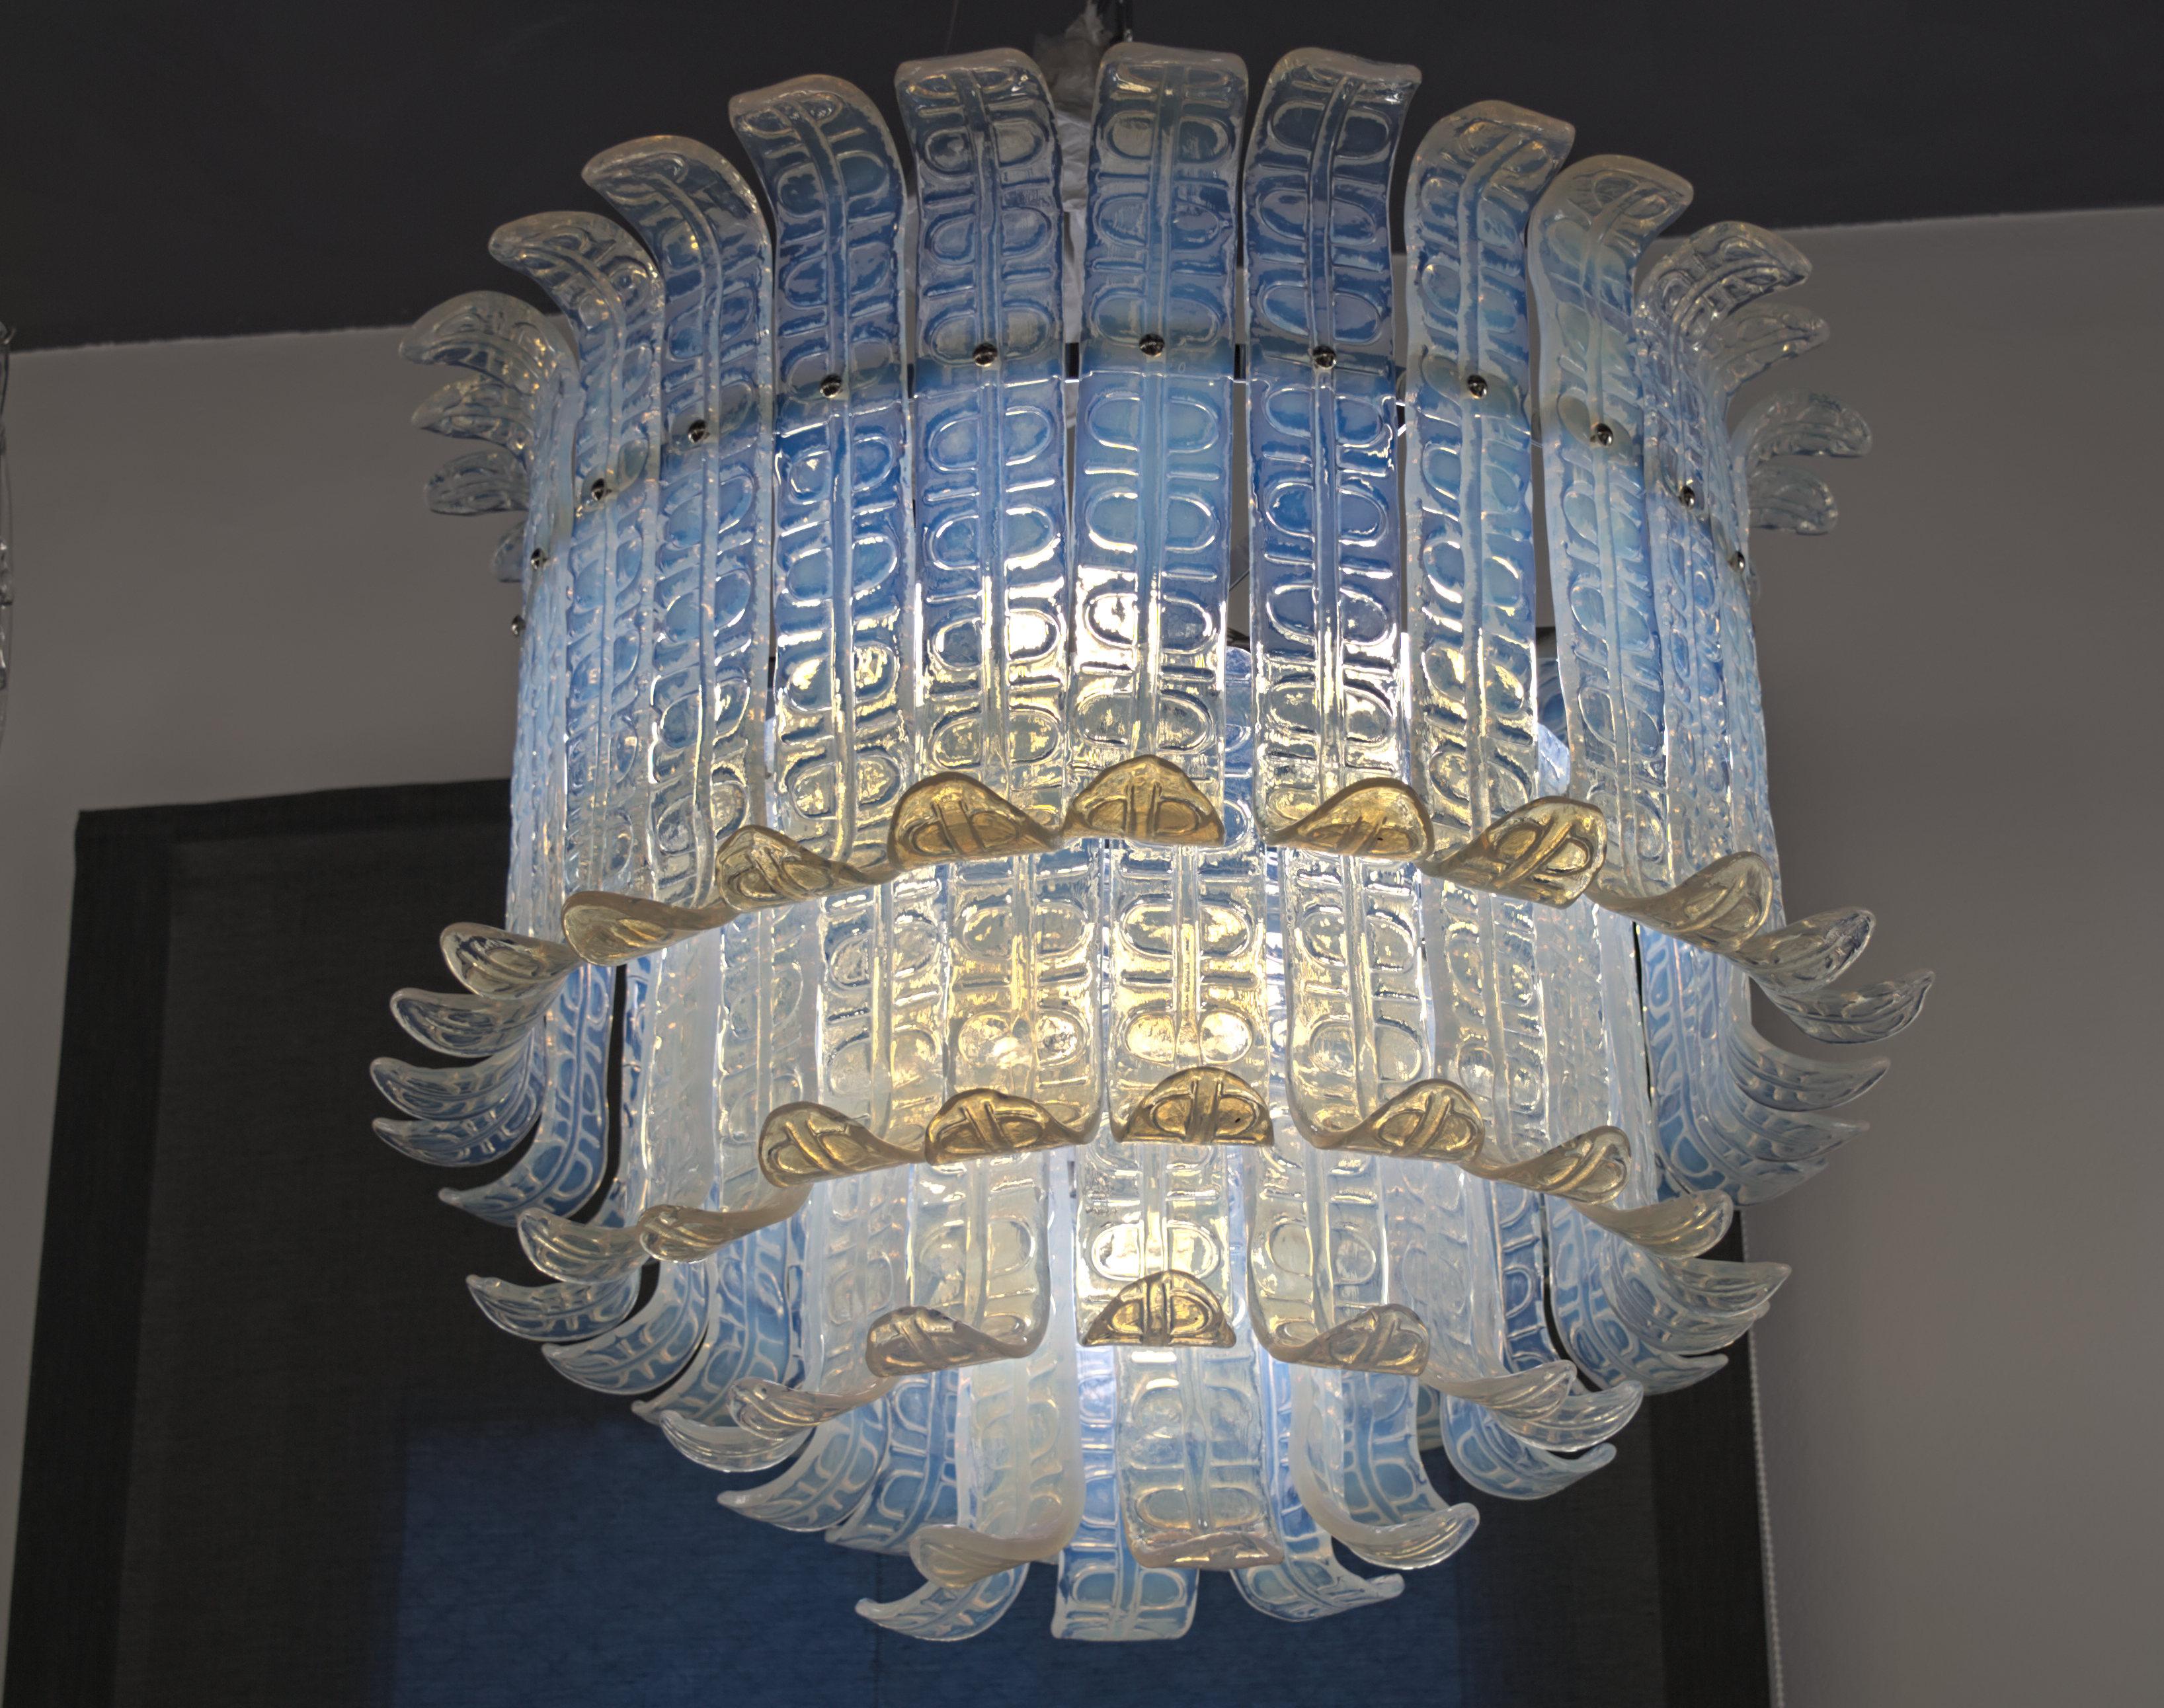 Great midcentury chandelier. Four tiers of Felci elements to tightly fence the bulb and the hardware. 
Hard to find true opaline glass which shows his unique fading from blue to amber.

Piastra technique. Opaline glass is poured over a mold with